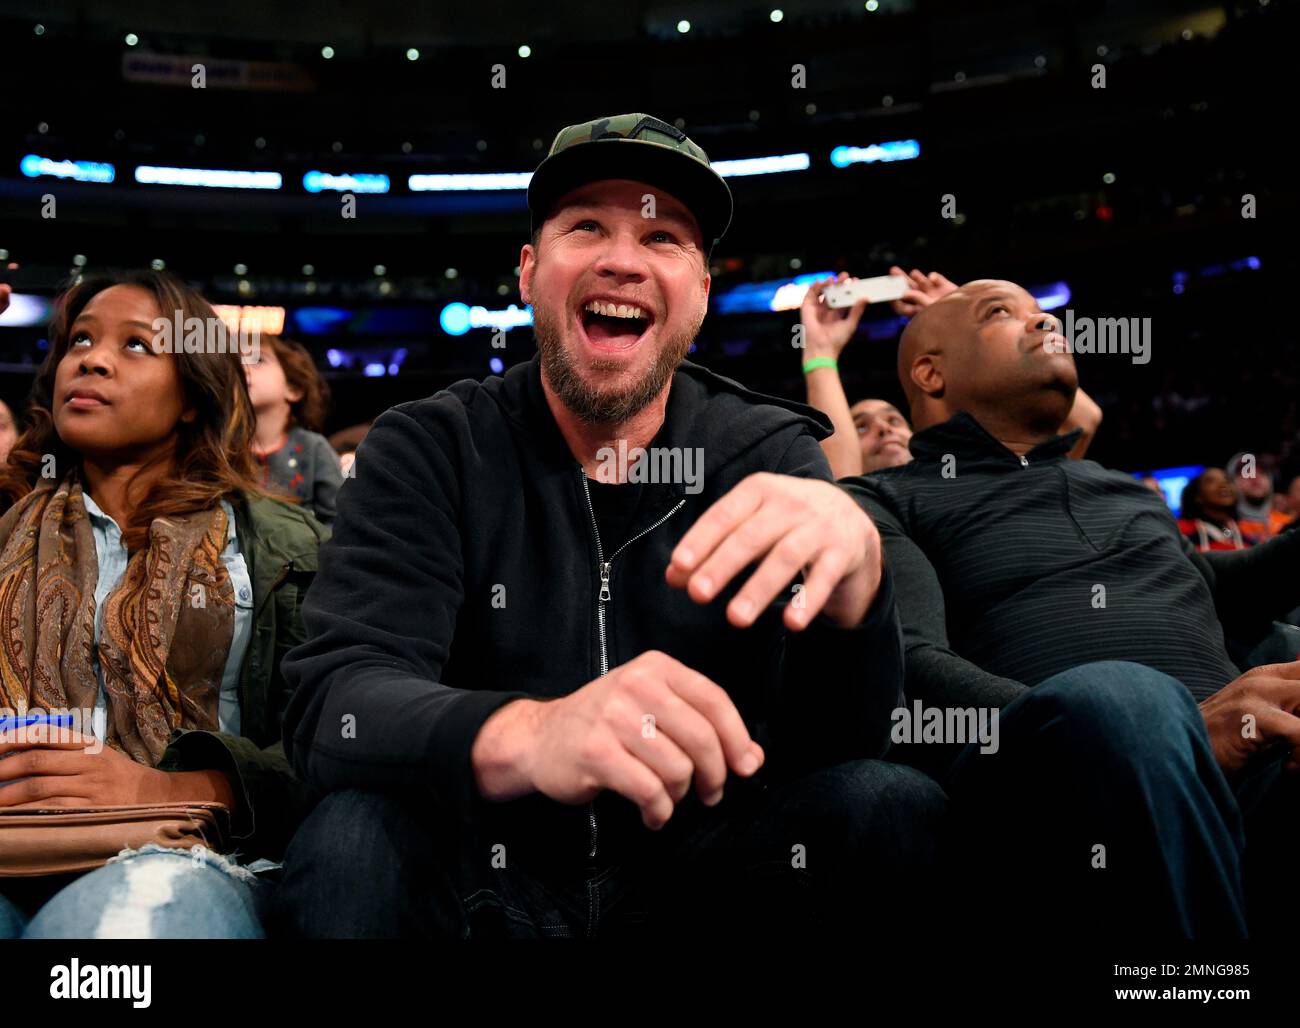 FILE - In this Nov. 6, 2016 file photo, Pearl Jam bassist Jeff Ament reacts  as he is introduced during an NBA basketball game between the New York  Knicks and the Utah